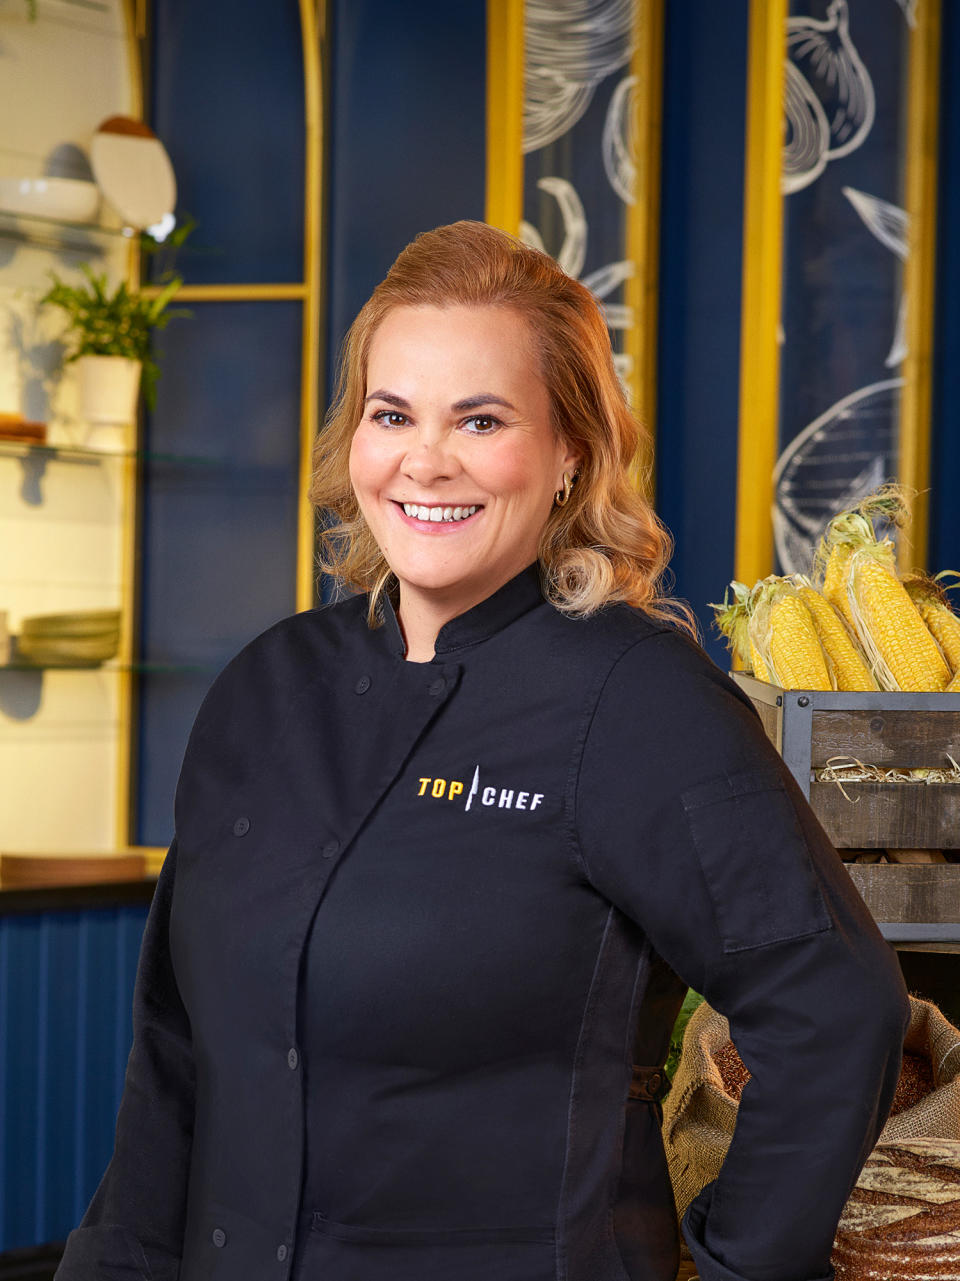 The winner of Top Chef Poland season 7 runs her own cooking school and consultancy called CookShe.